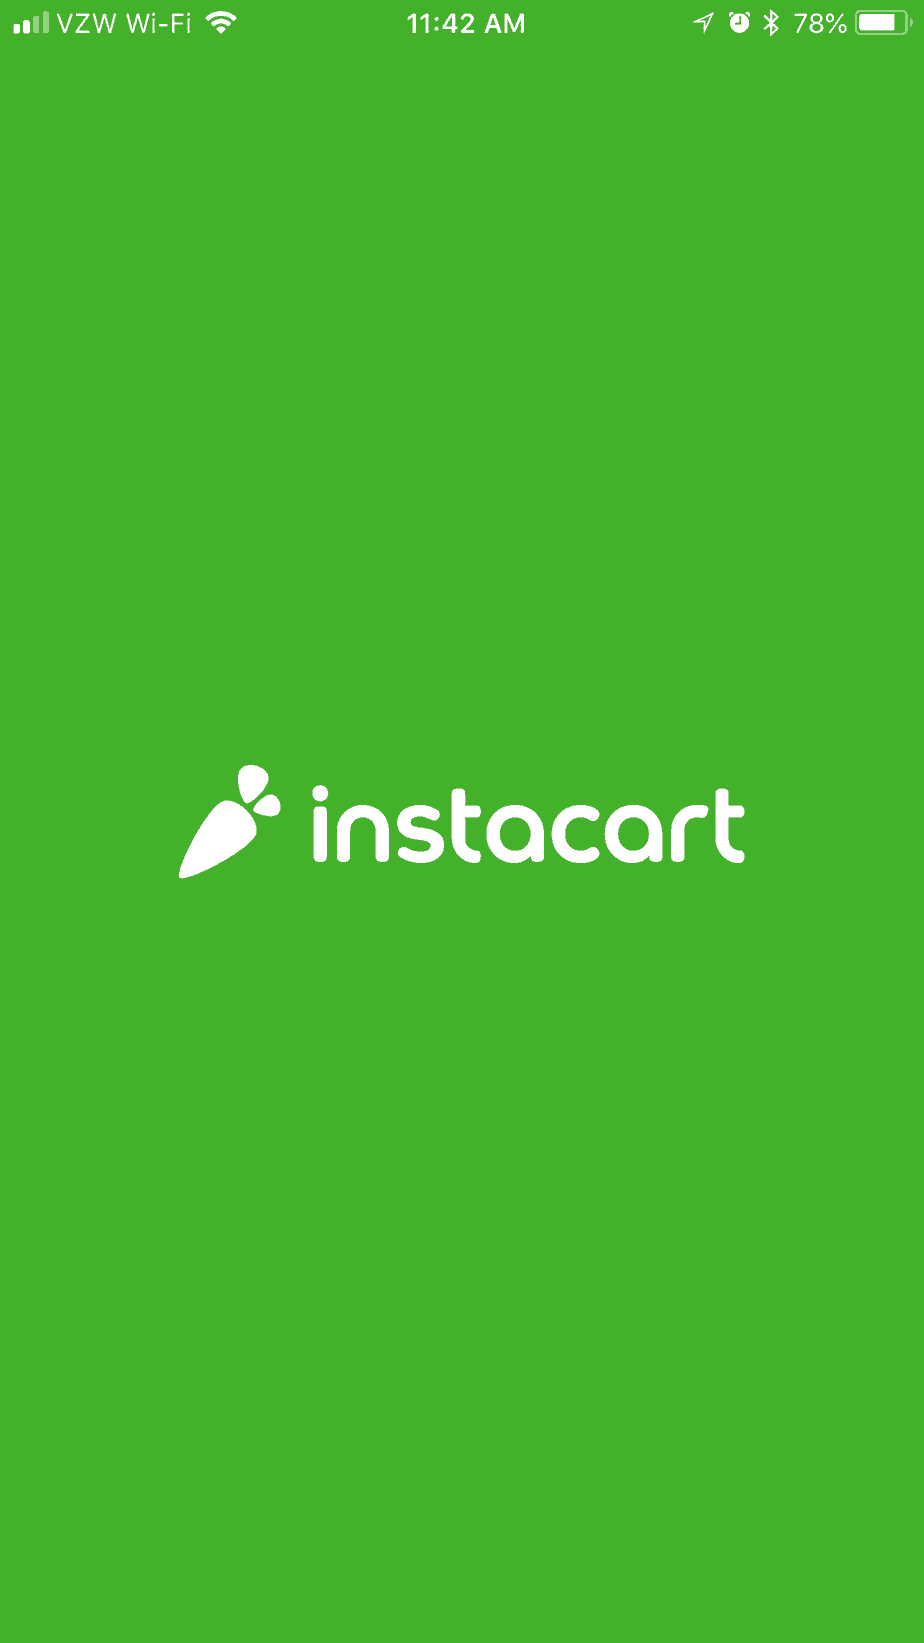 Shipt vs Instacart: Which Grocery Delivery Service is Right for